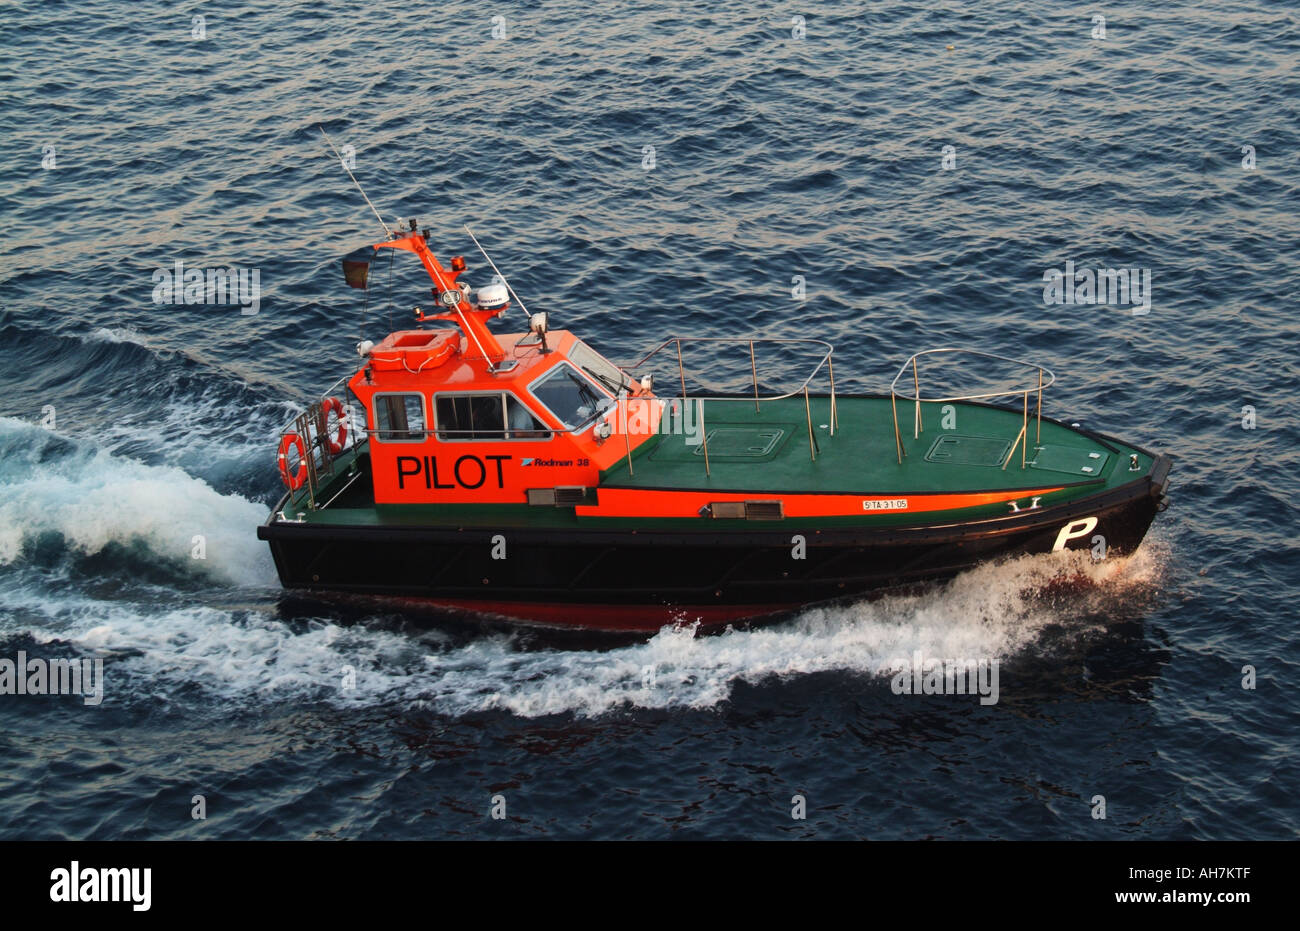 Port of Tarragona pilot launch departs after delivering pilot to ship Stock Photo